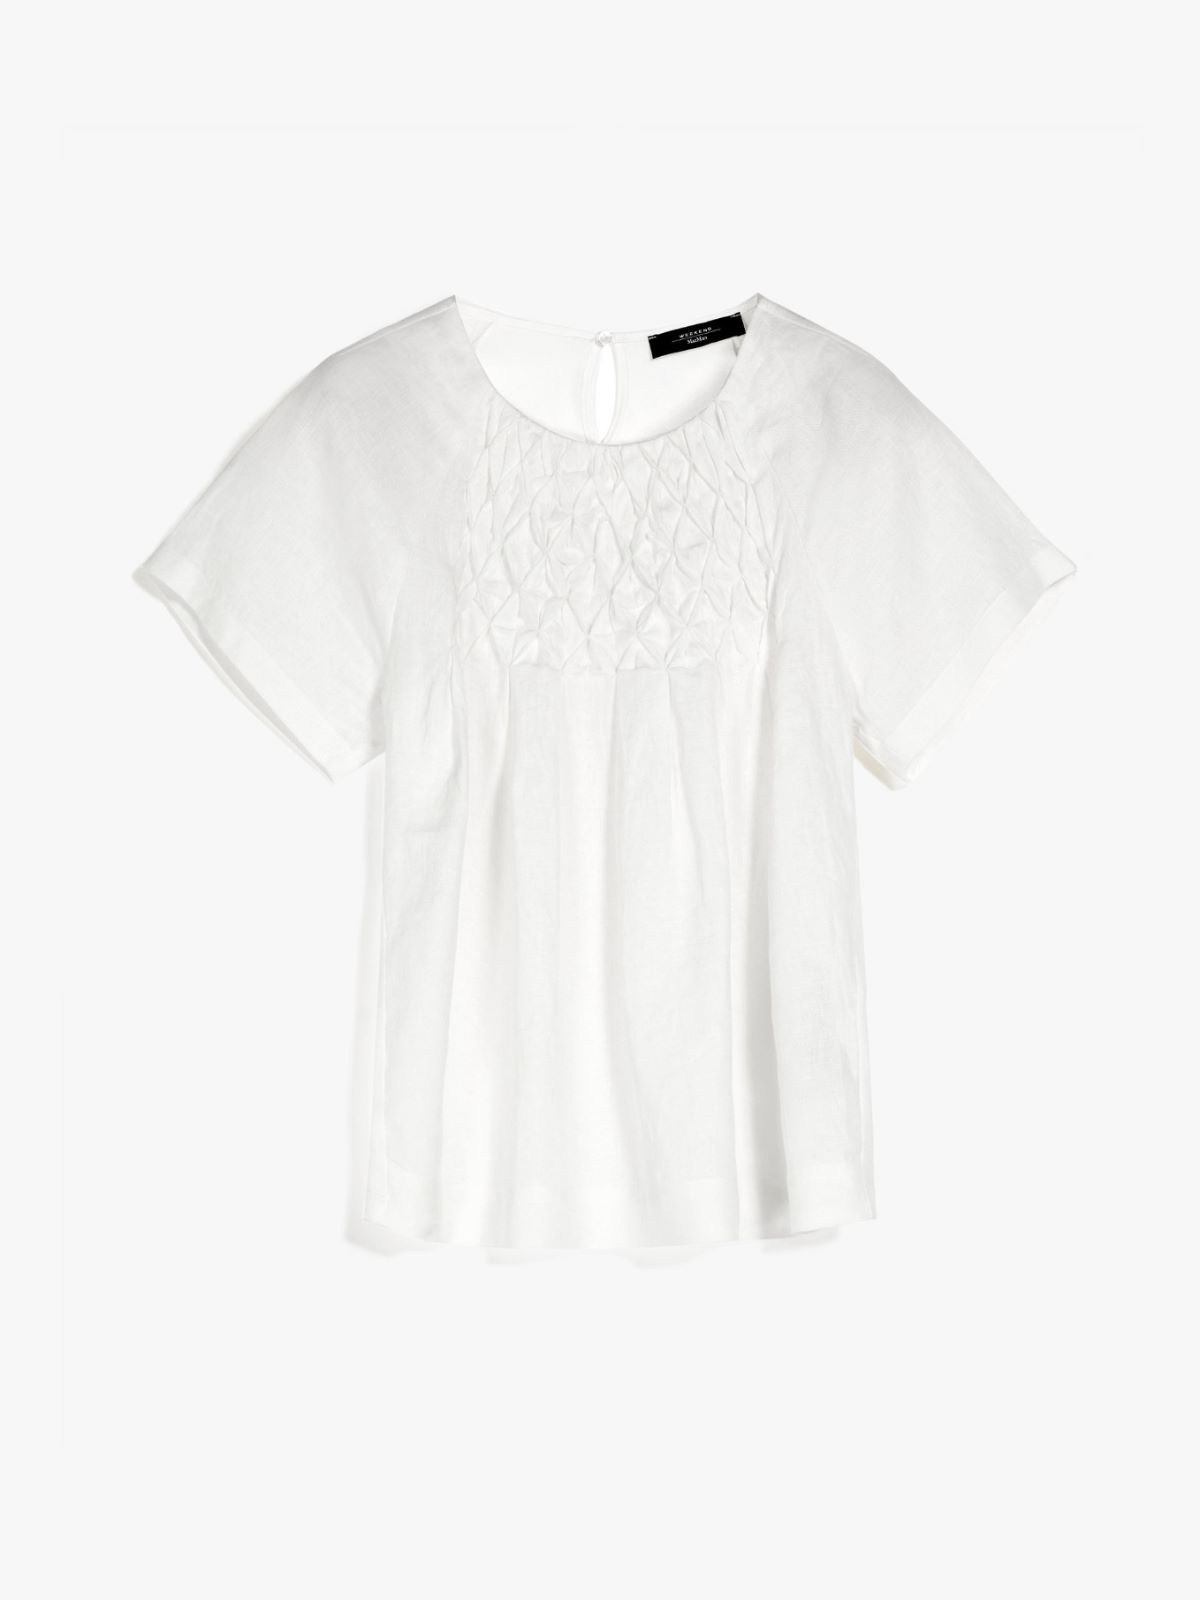 Linen and cotton blouse - WHITE - Weekend Max Mara - 6